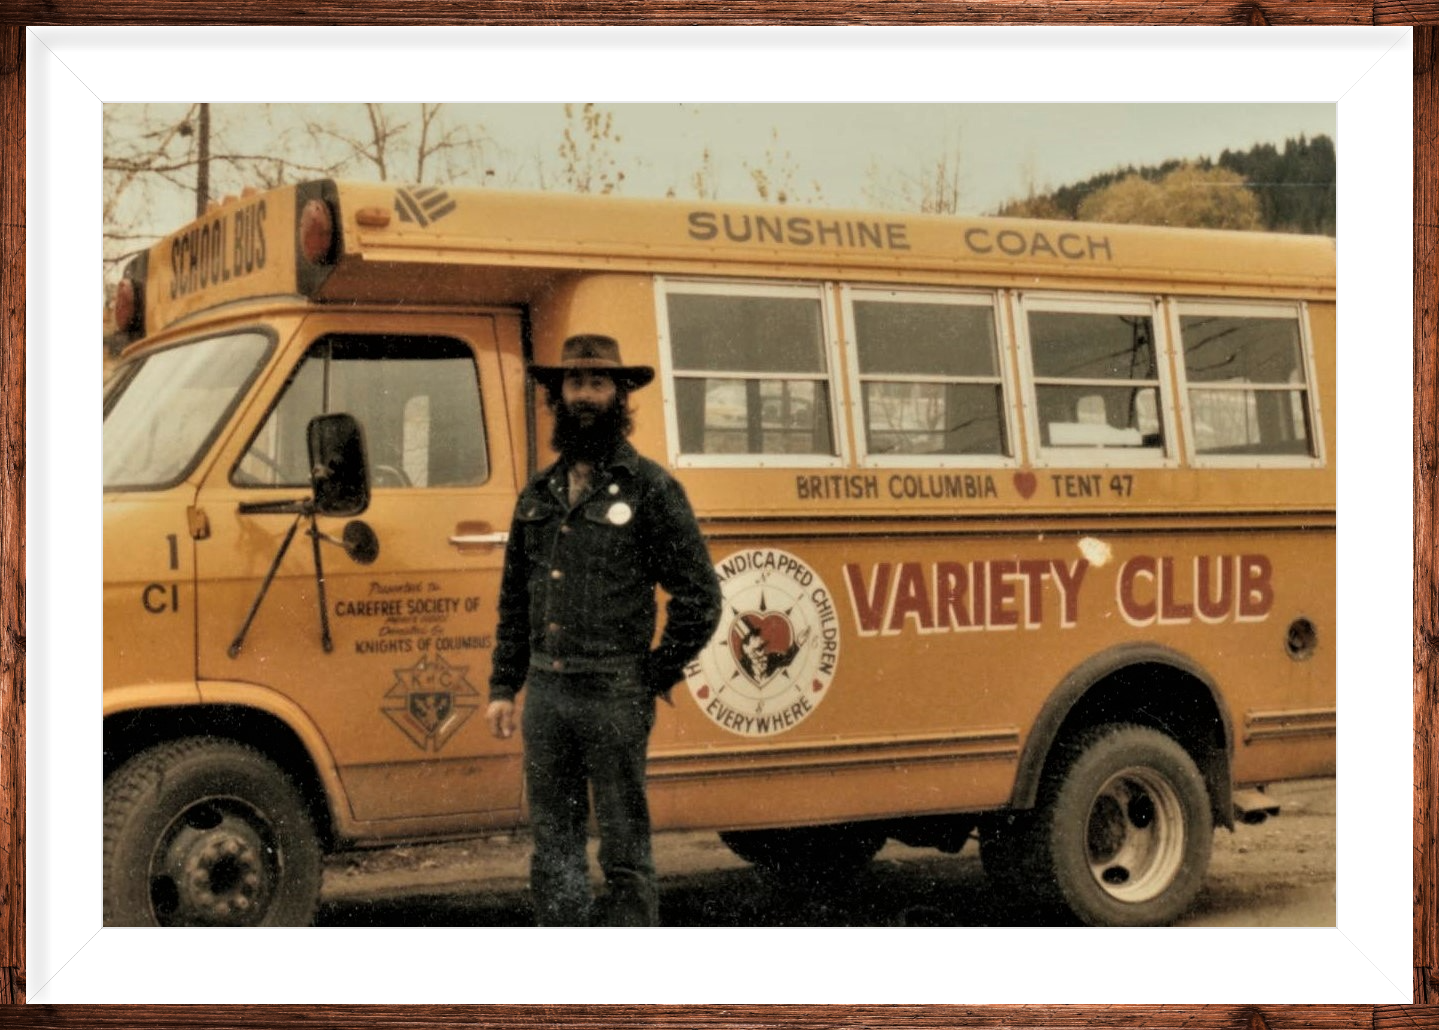 Don with Variety Club bus